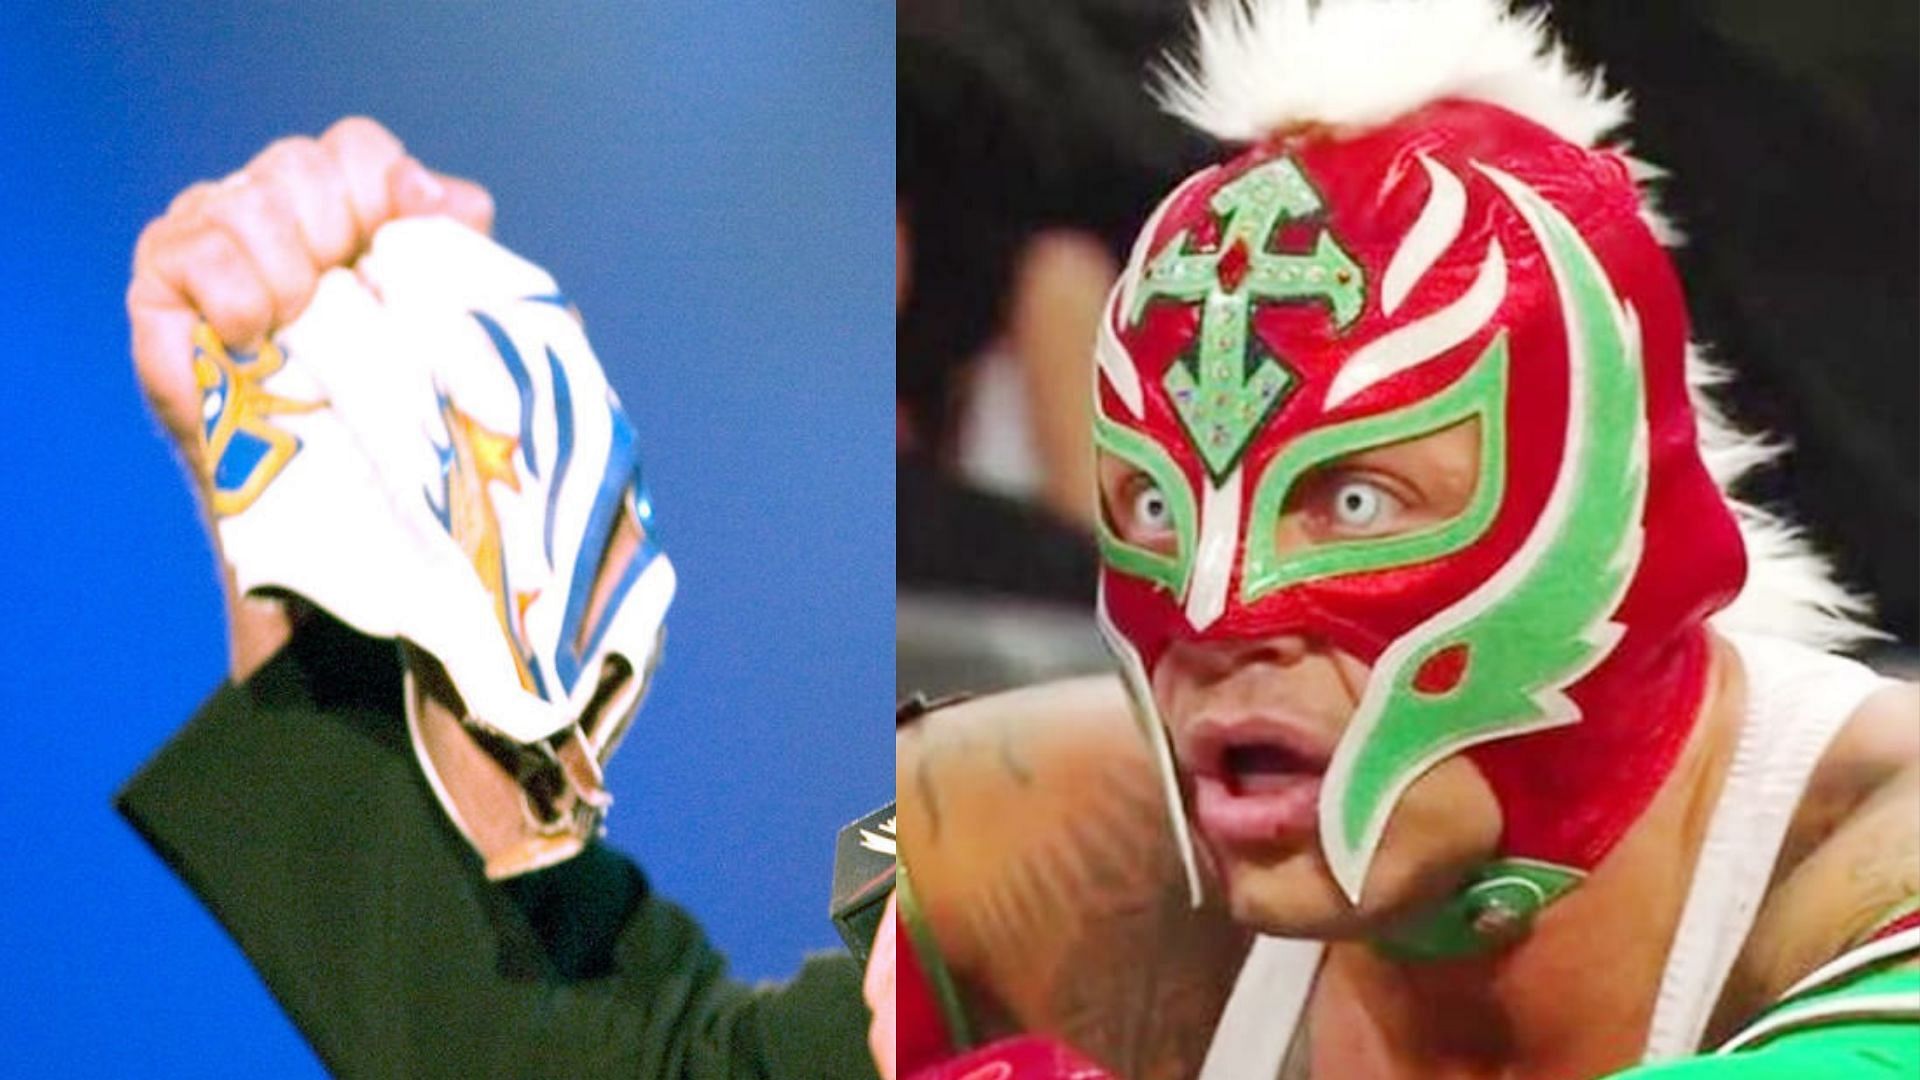 Rey Mysterio has been equated with his mask for a long time